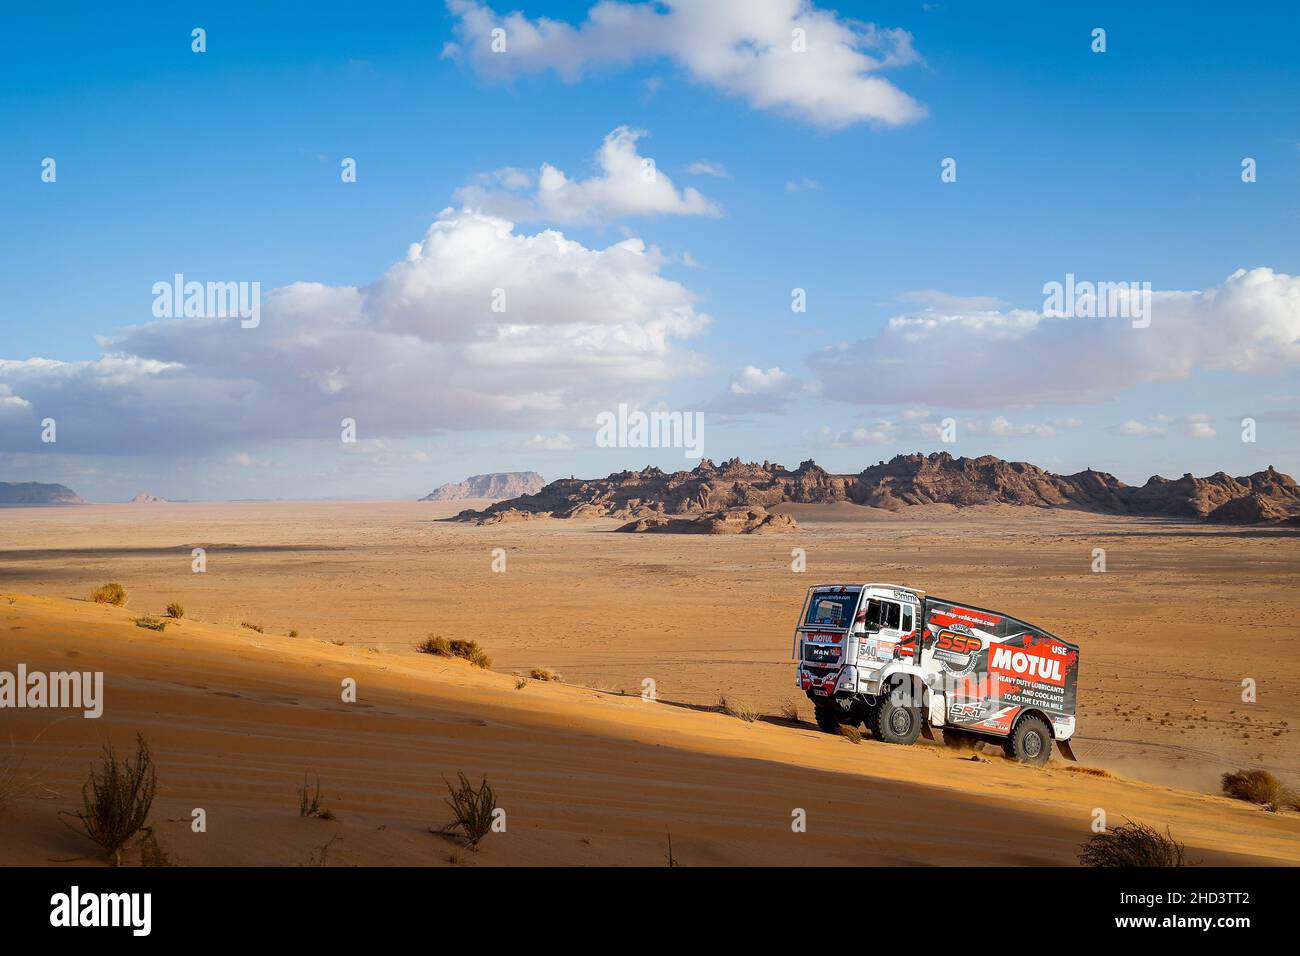 540 Besnard Sylvain (fra), Laliche Sylvain (fra), Cappucio Frederic (fra), Team SSP, Man TGA 114, T5 FIA Camion, action during the Stage 1B of the Dakar Rally 2022 around Hail, on January 2nd, 2022 in Hail, Saudi Arabia - Photo: Frederic Le Floc H/DPPI/LiveMedia Stock Photo